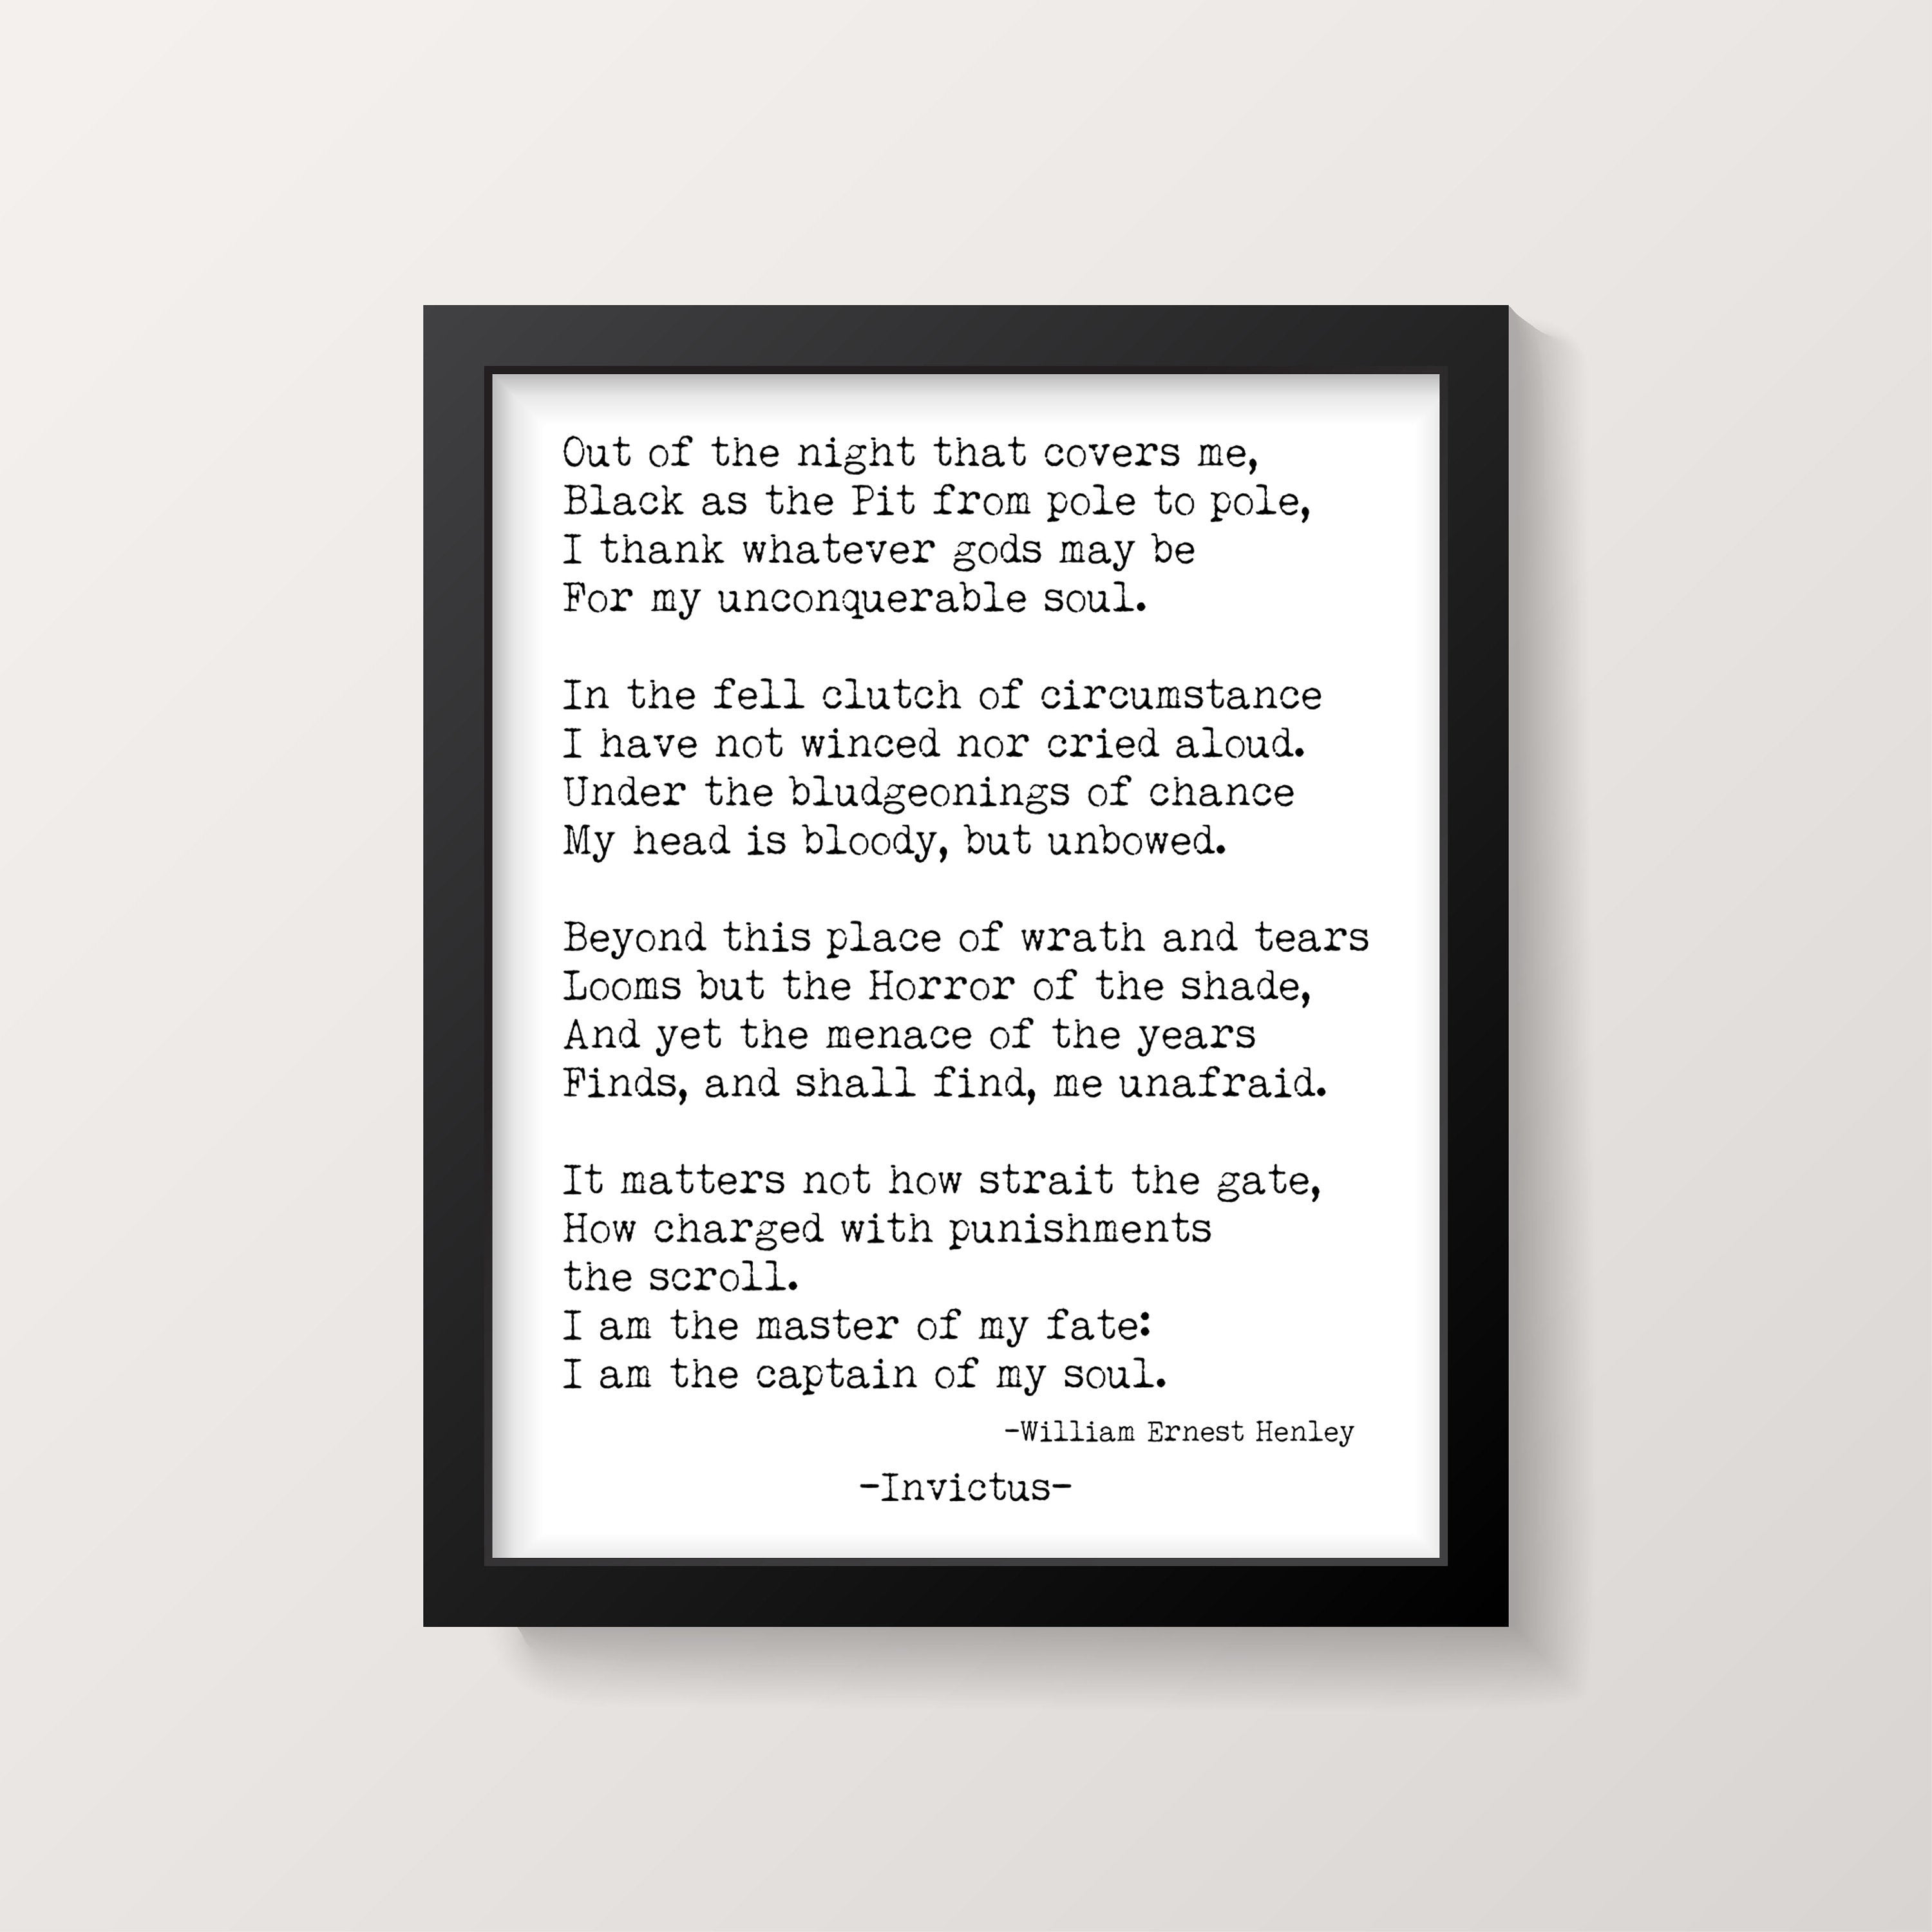 William Ernest Henley Invictus Print, I am the Master of my Fate , I am the captain of my soul Unframed Motivational Inspiring Print - BookQuoteDecor